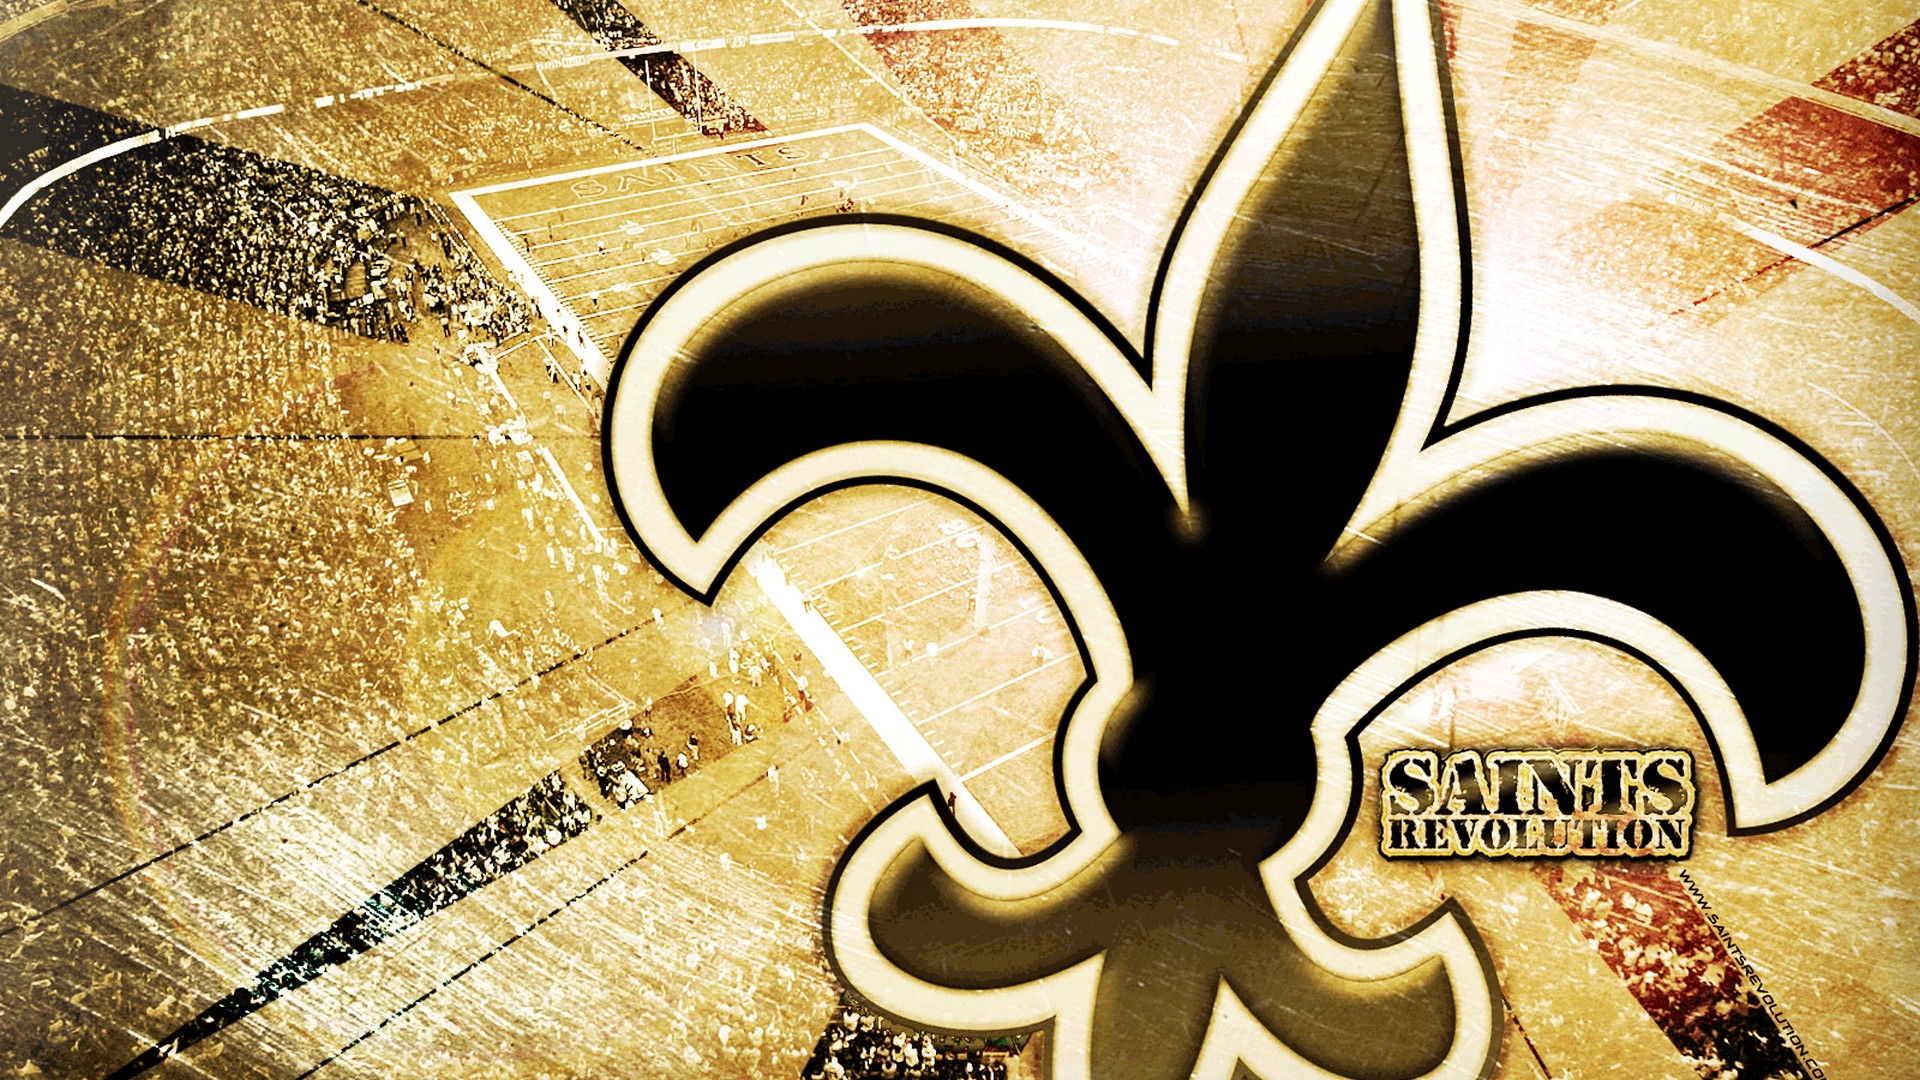 New Orleans Saints Mac Backgrounds With Resolution 1920X1080 pixel. You can make this wallpaper for your Mac or Windows Desktop Background, iPhone, Android or Tablet and another Smartphone device for free